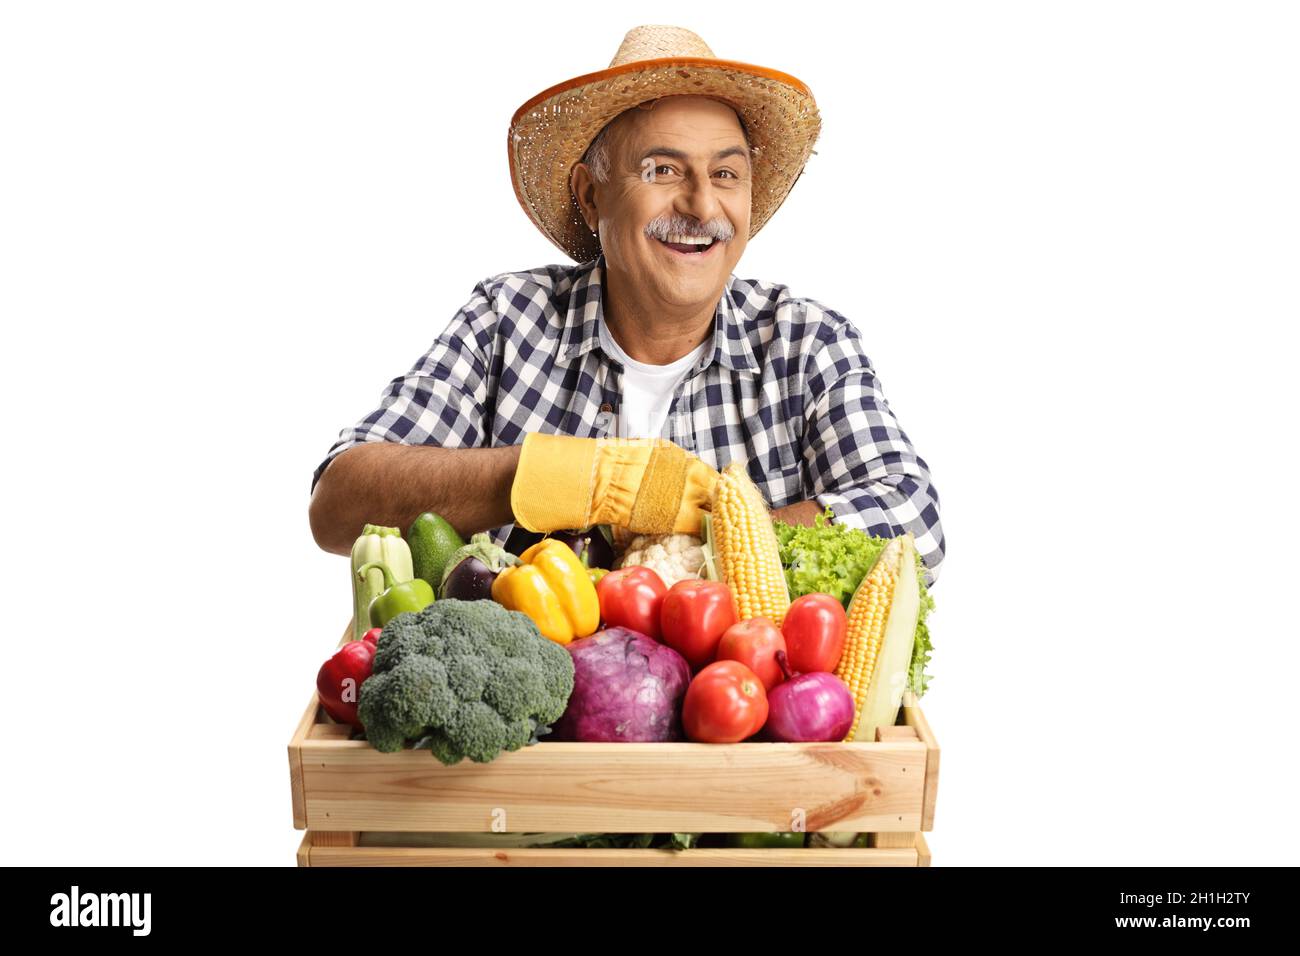 Mature farmer leaning on a crate full of fresh healthy vegetabales isolated on white background Stock Photo